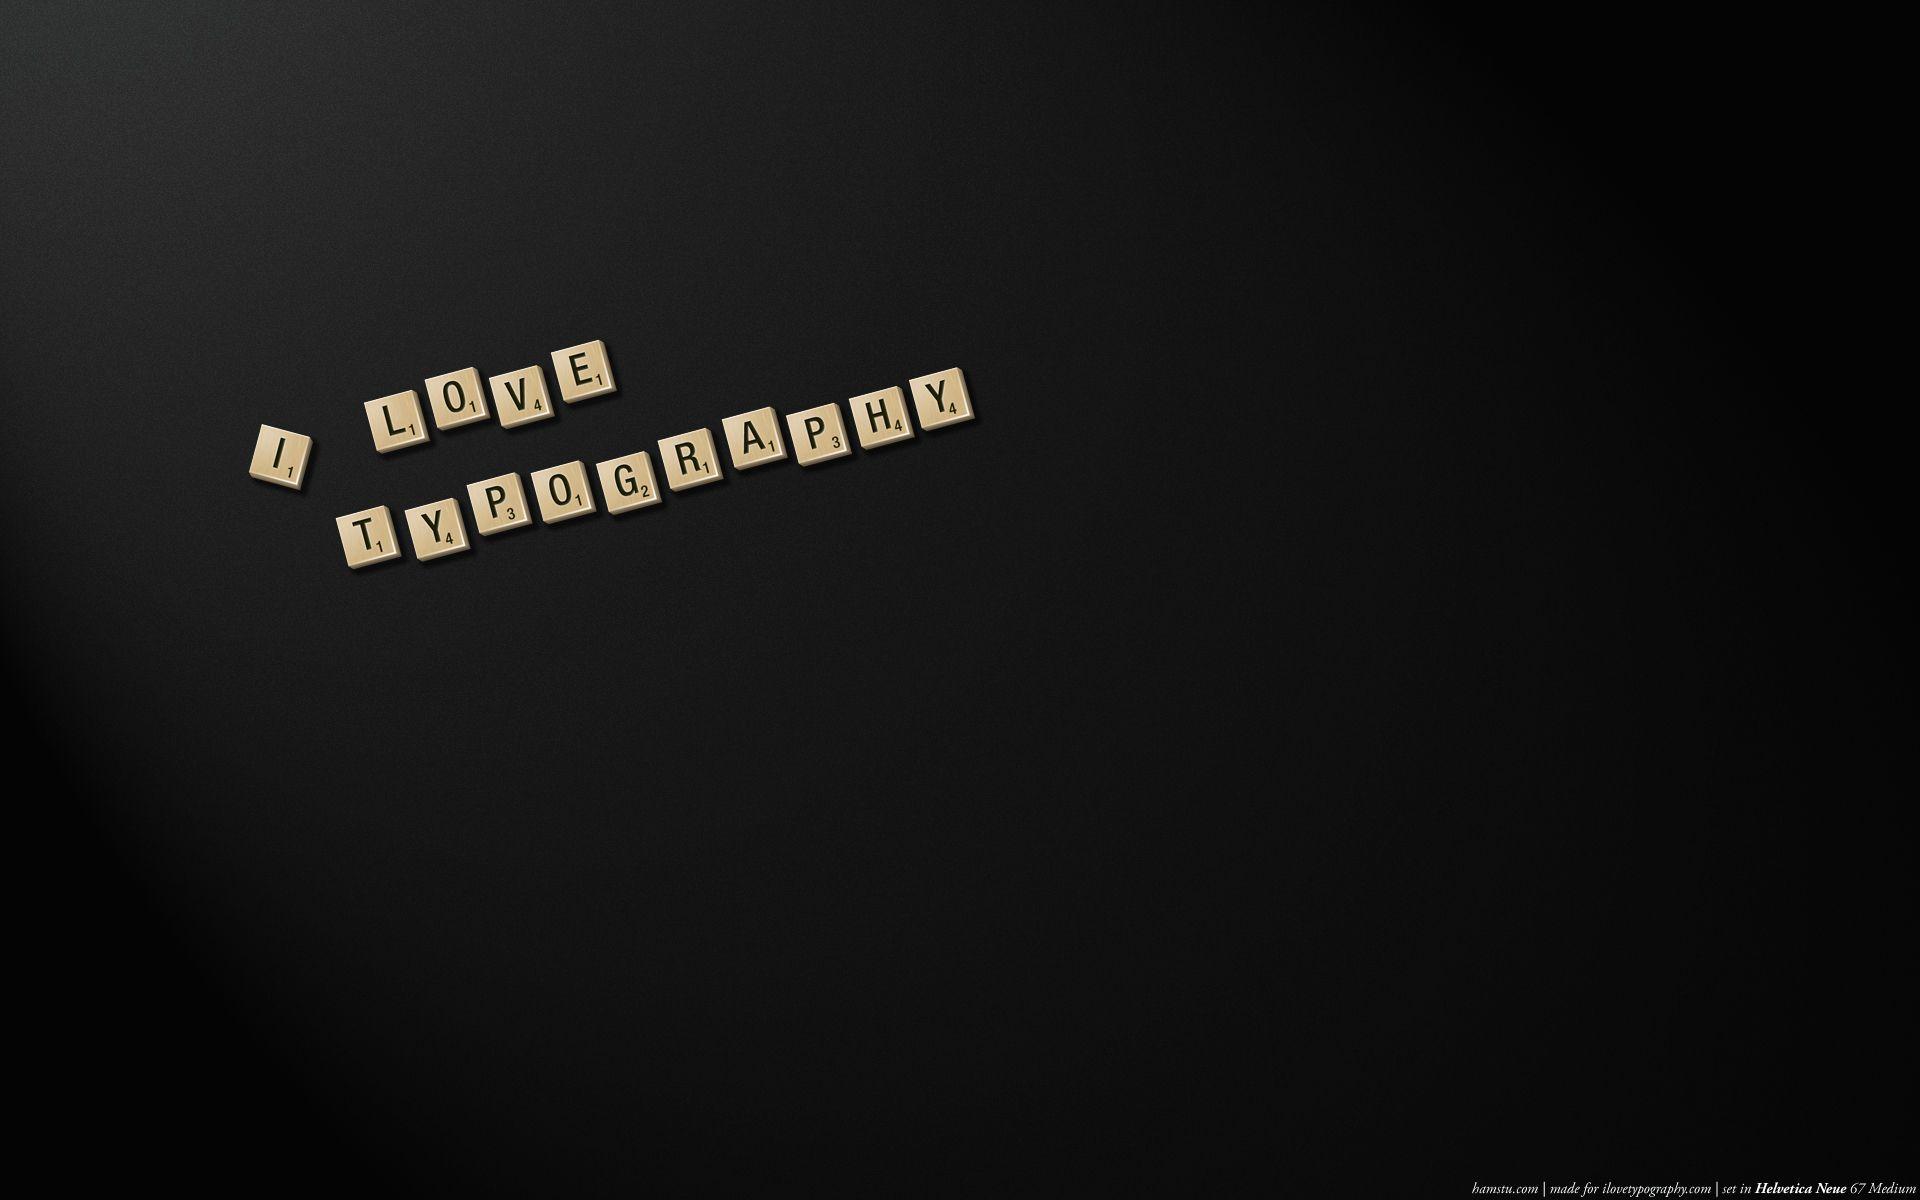 Creative Typography Wallpaper To Spice Up Your Desktop